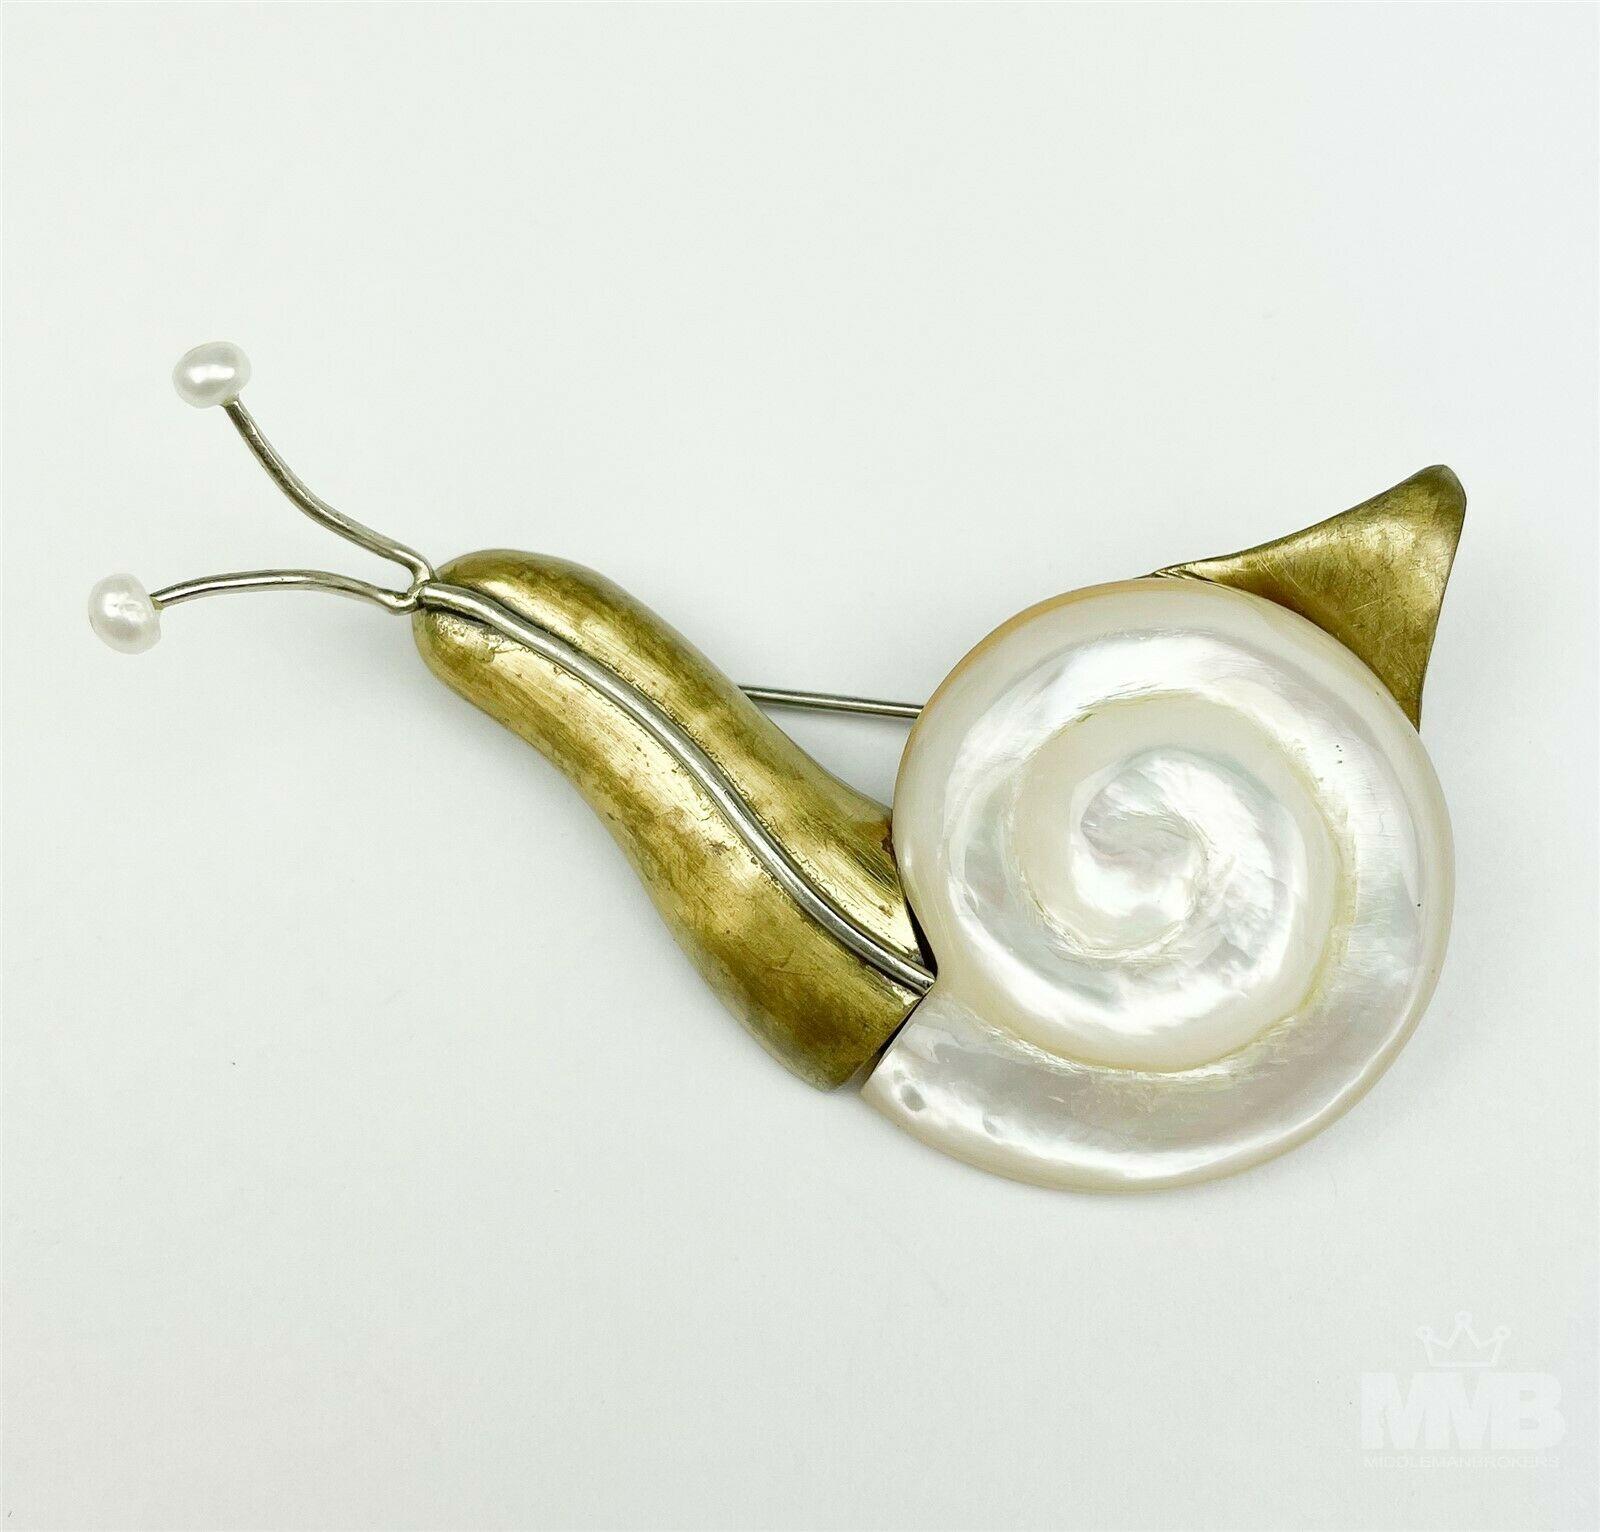 Modernist Designer Signed Fabrice Paris Mother Pearl Brass Snail Gold Tone Brooch Pin 